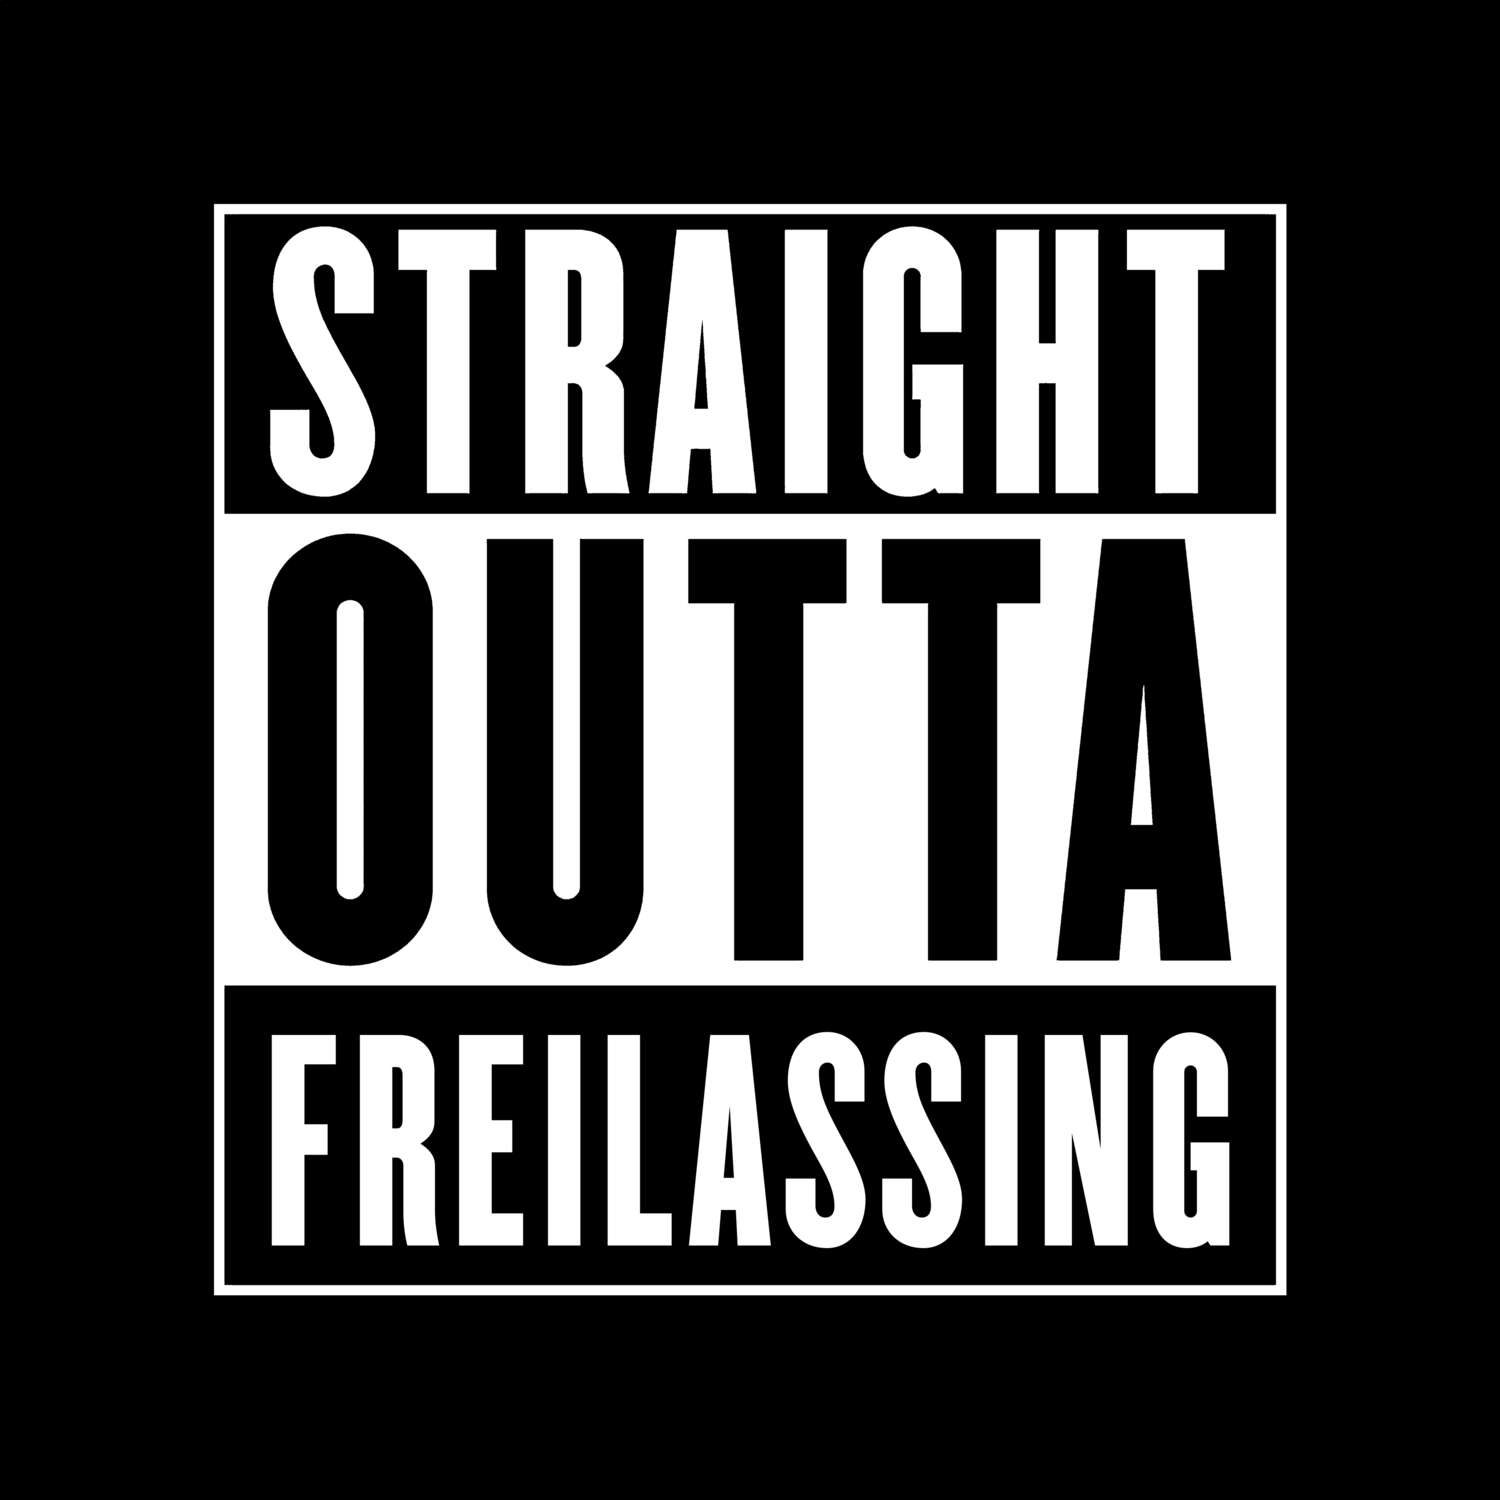 Freilassing T-Shirt »Straight Outta«